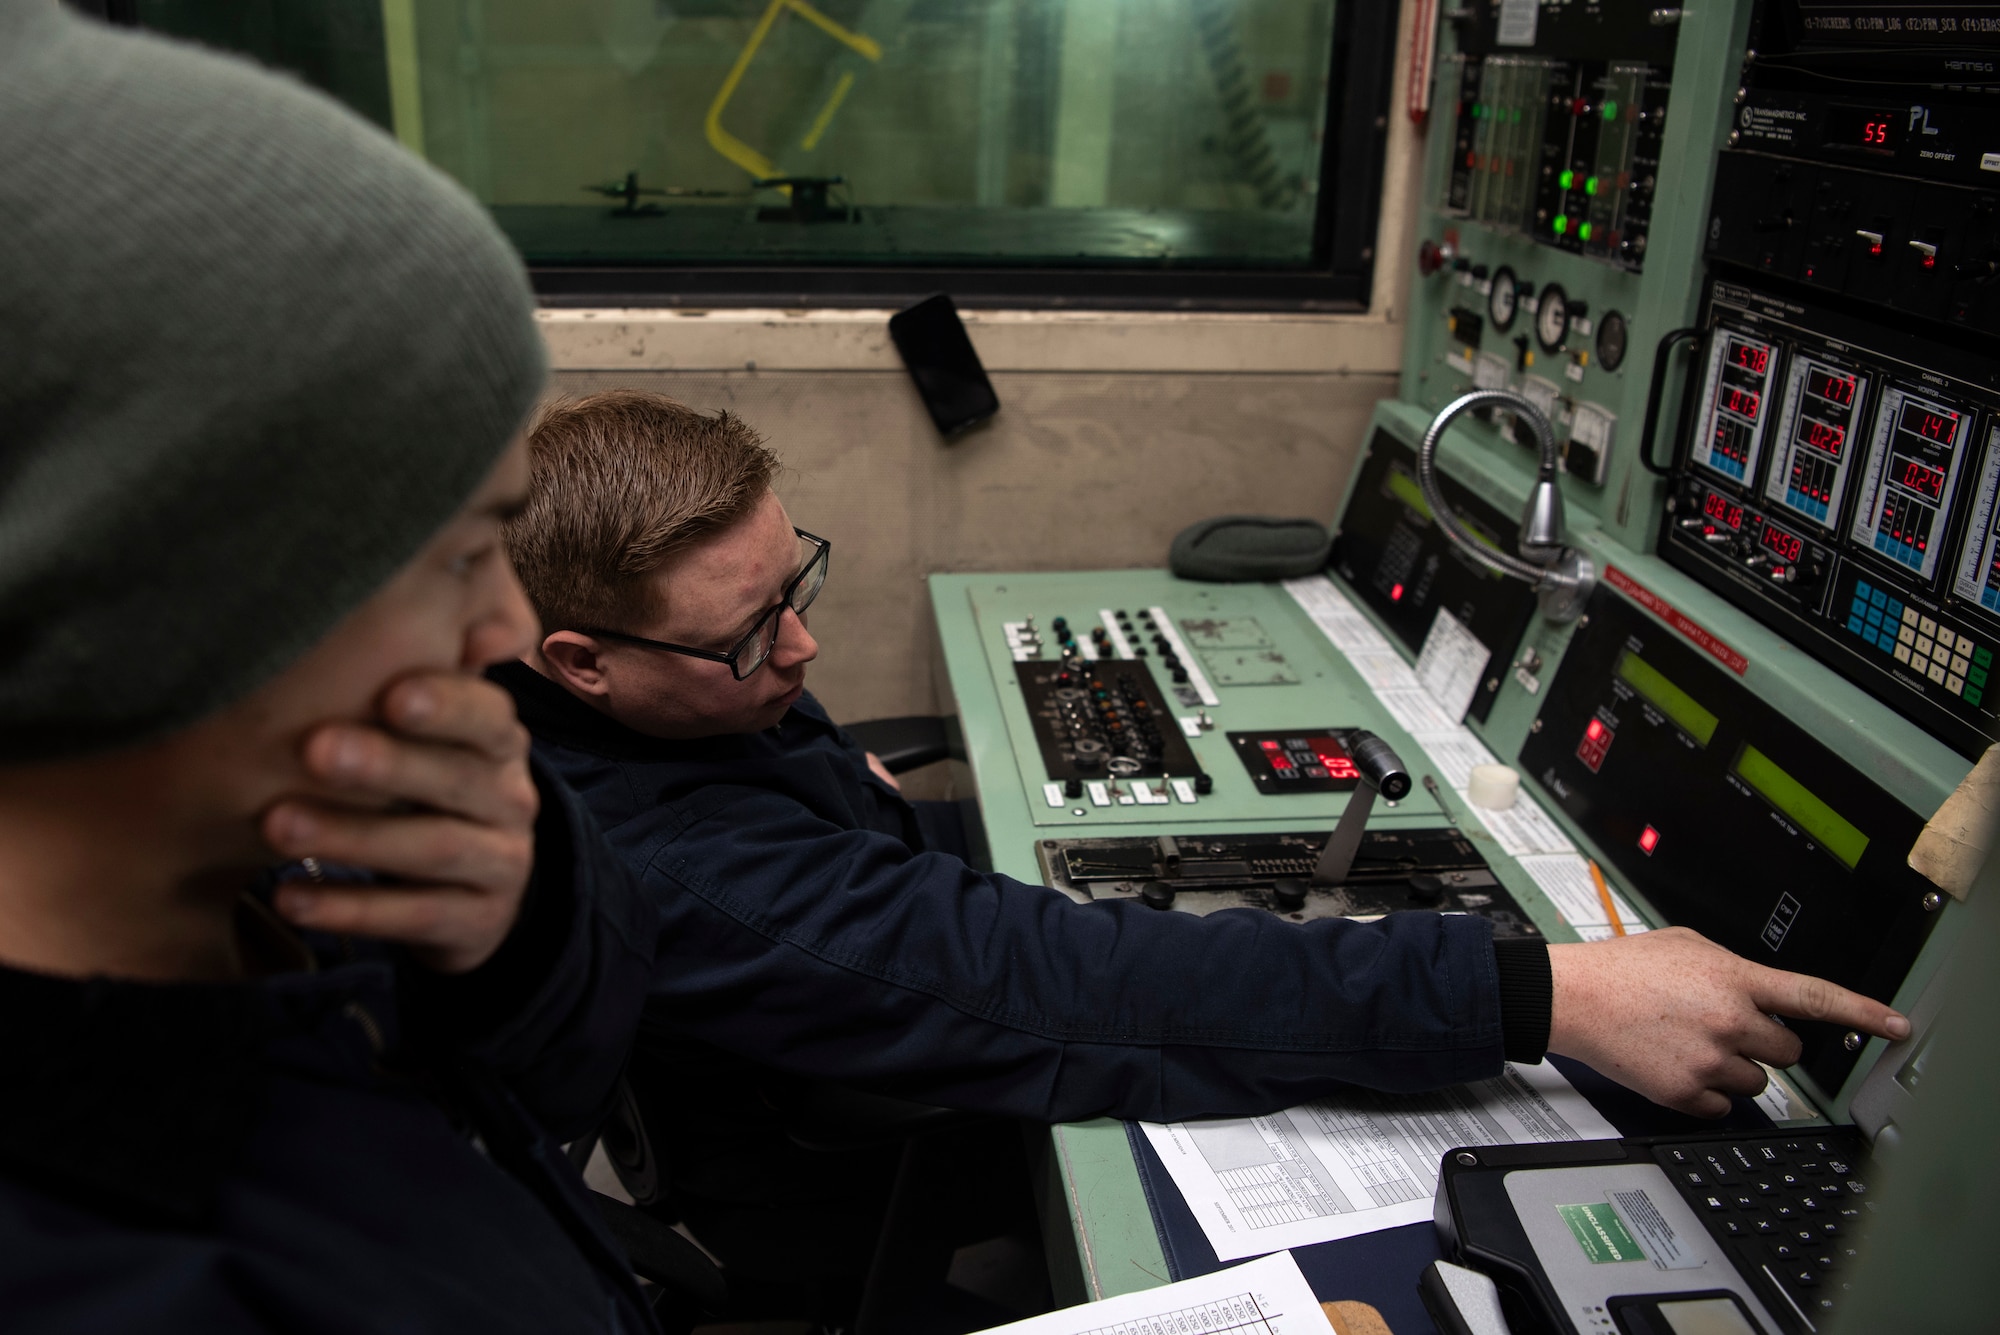 U.S. Air Force Staff Sgt. Dustin Gaskins, 52nd Maintenance Squadron aerospace propulsion craftsman, left, and Tech. Sgt. Aaron Filkins, 52nd MXS test cell shift supervisor, monitor engine performance during test operations at Spangdahlem Air Base, Germany, Feb. 25, 2020. The test cell is used to make sure jet engines are in quality-working order after being built or repaired. (U.S. Air Force photo by Airman 1st Class Valerie Seelye)